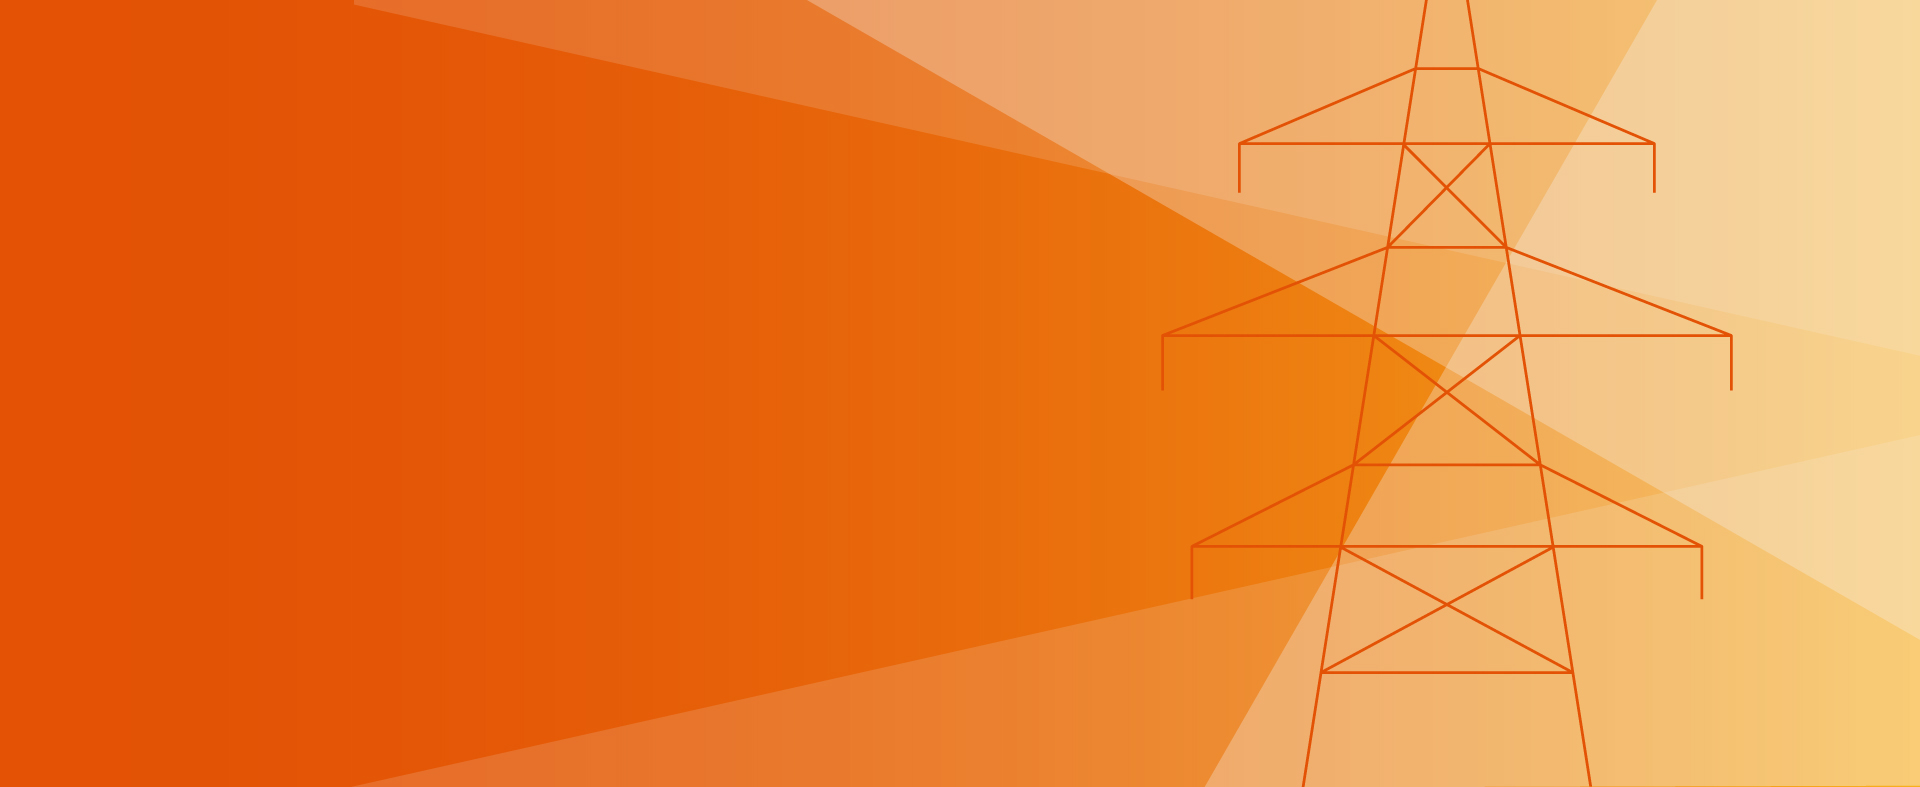 Drawing of a pylon with an orange background